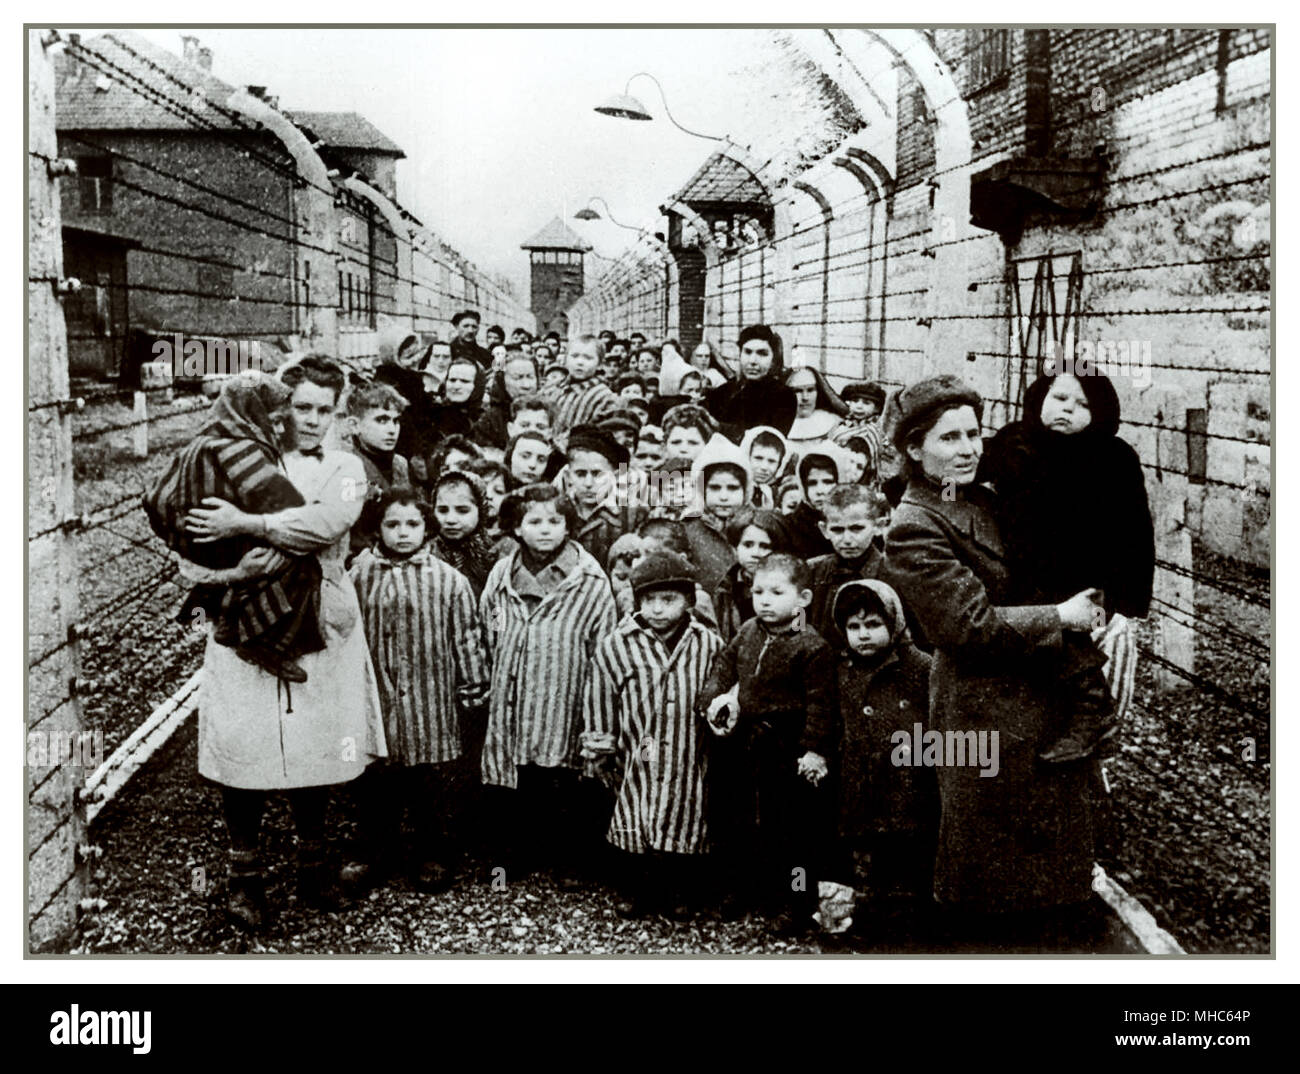 AUSCHWITZ CHILDREN SURVIVORS INMATES BABIES AND WOMEN STRIPED CAMP UNIFORM UNIFORMS LIBERATION closed in by stretches of electrified barbed wire and guard posts, staring without emotion to their liberators. A still frame of horror from Auschwitz Birkenau Nazi concentration camp. Liberation date January 27 1945. Stock Photo